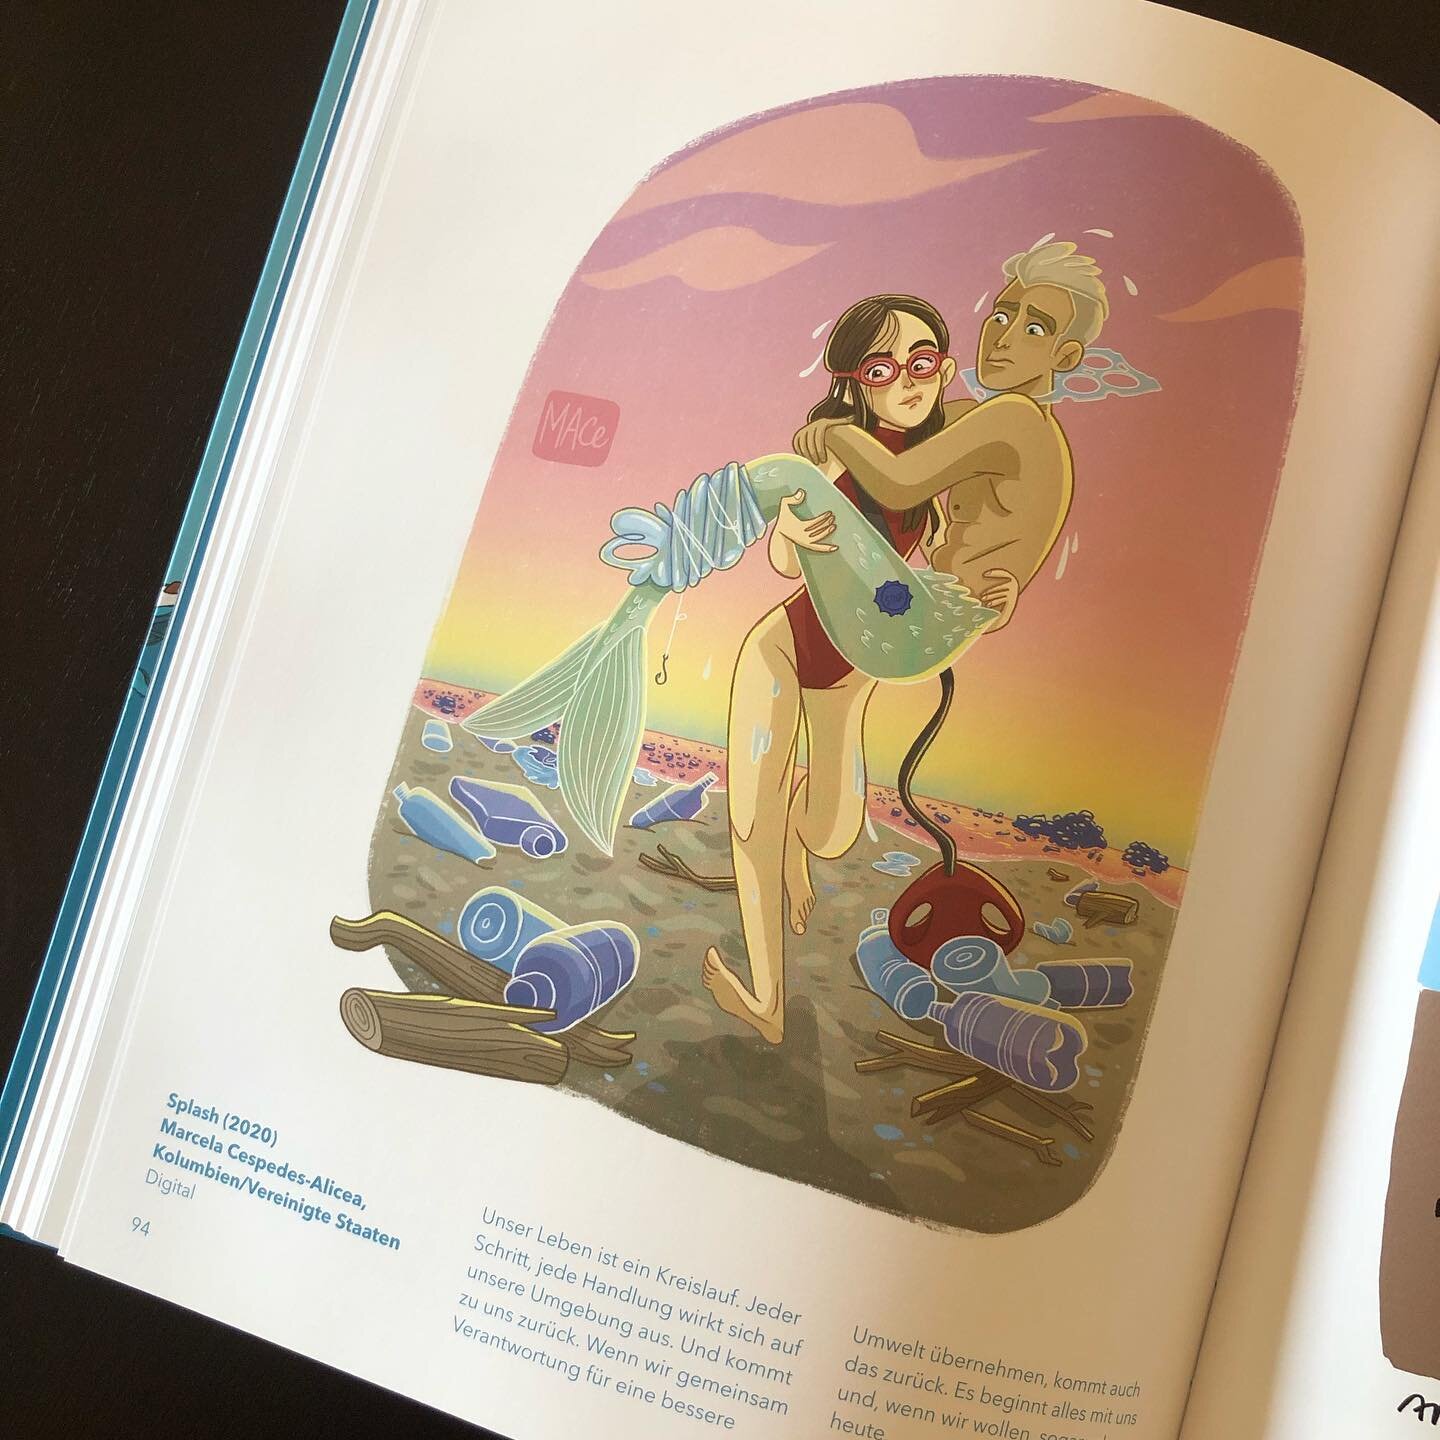 It arrived in the mail today... my copy of Seagulls. Waste. And some Mermaids. Its always exciting to get a book with your art in it, AL. WAYS. ! 
This is such a cool project with lots of artist from many parts of the world joining together to raise 